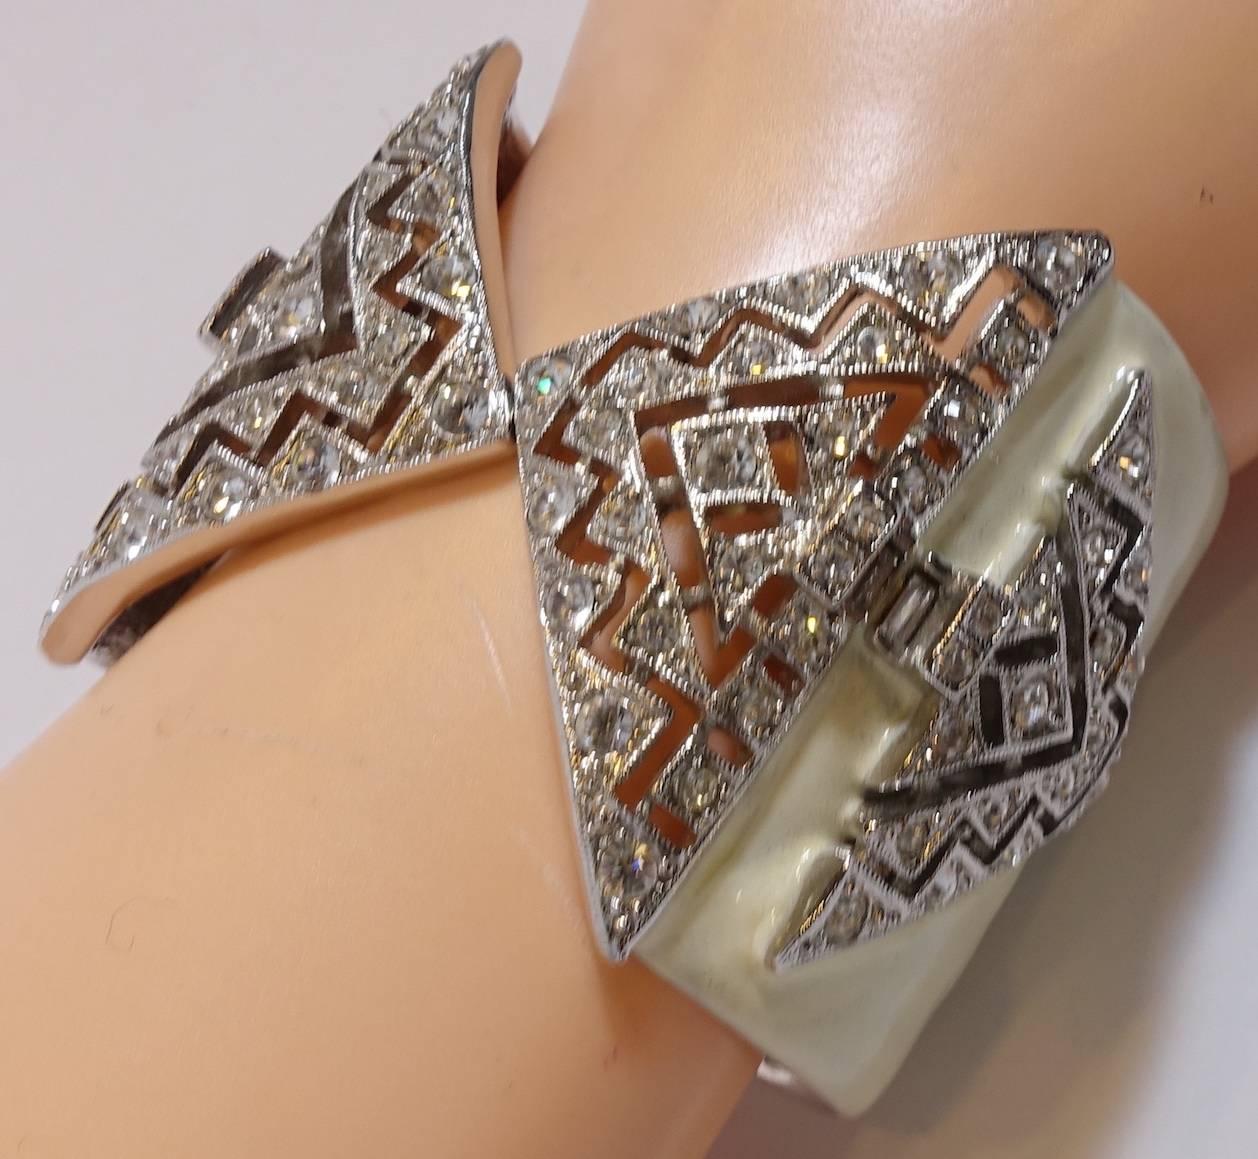 This signed Kenneth Jay Lane bracelet features clear crystals on an ivory color enameling on a nickel-free silver-plated base metal setting.  This bracelet measures 6-3/4” around the inside x 2” wide and is signed “KJL”.  It is in excellent